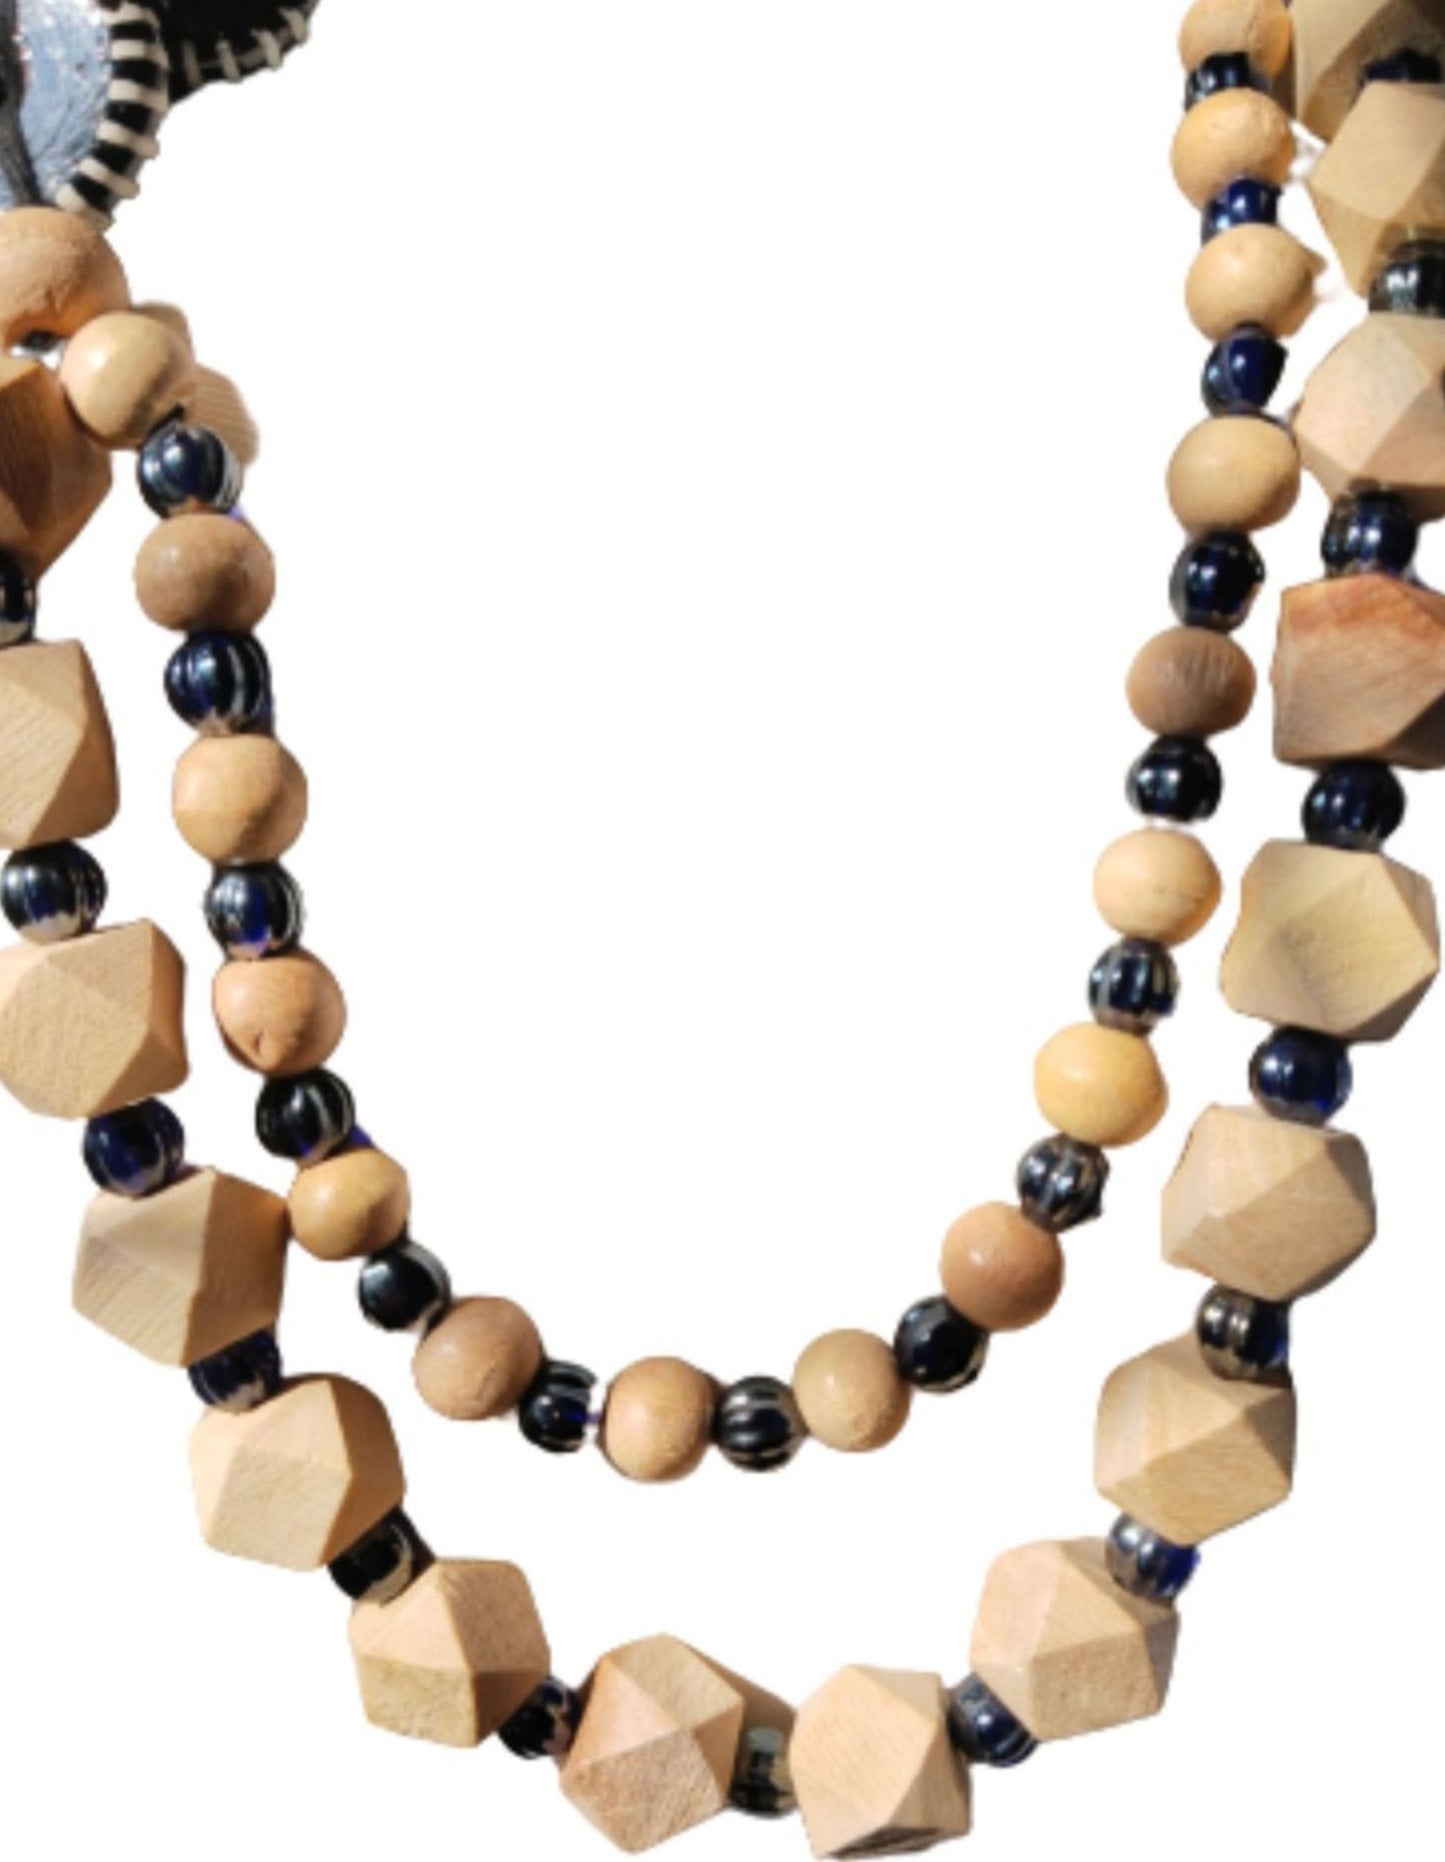 2 layer round and geometric beaded necklace